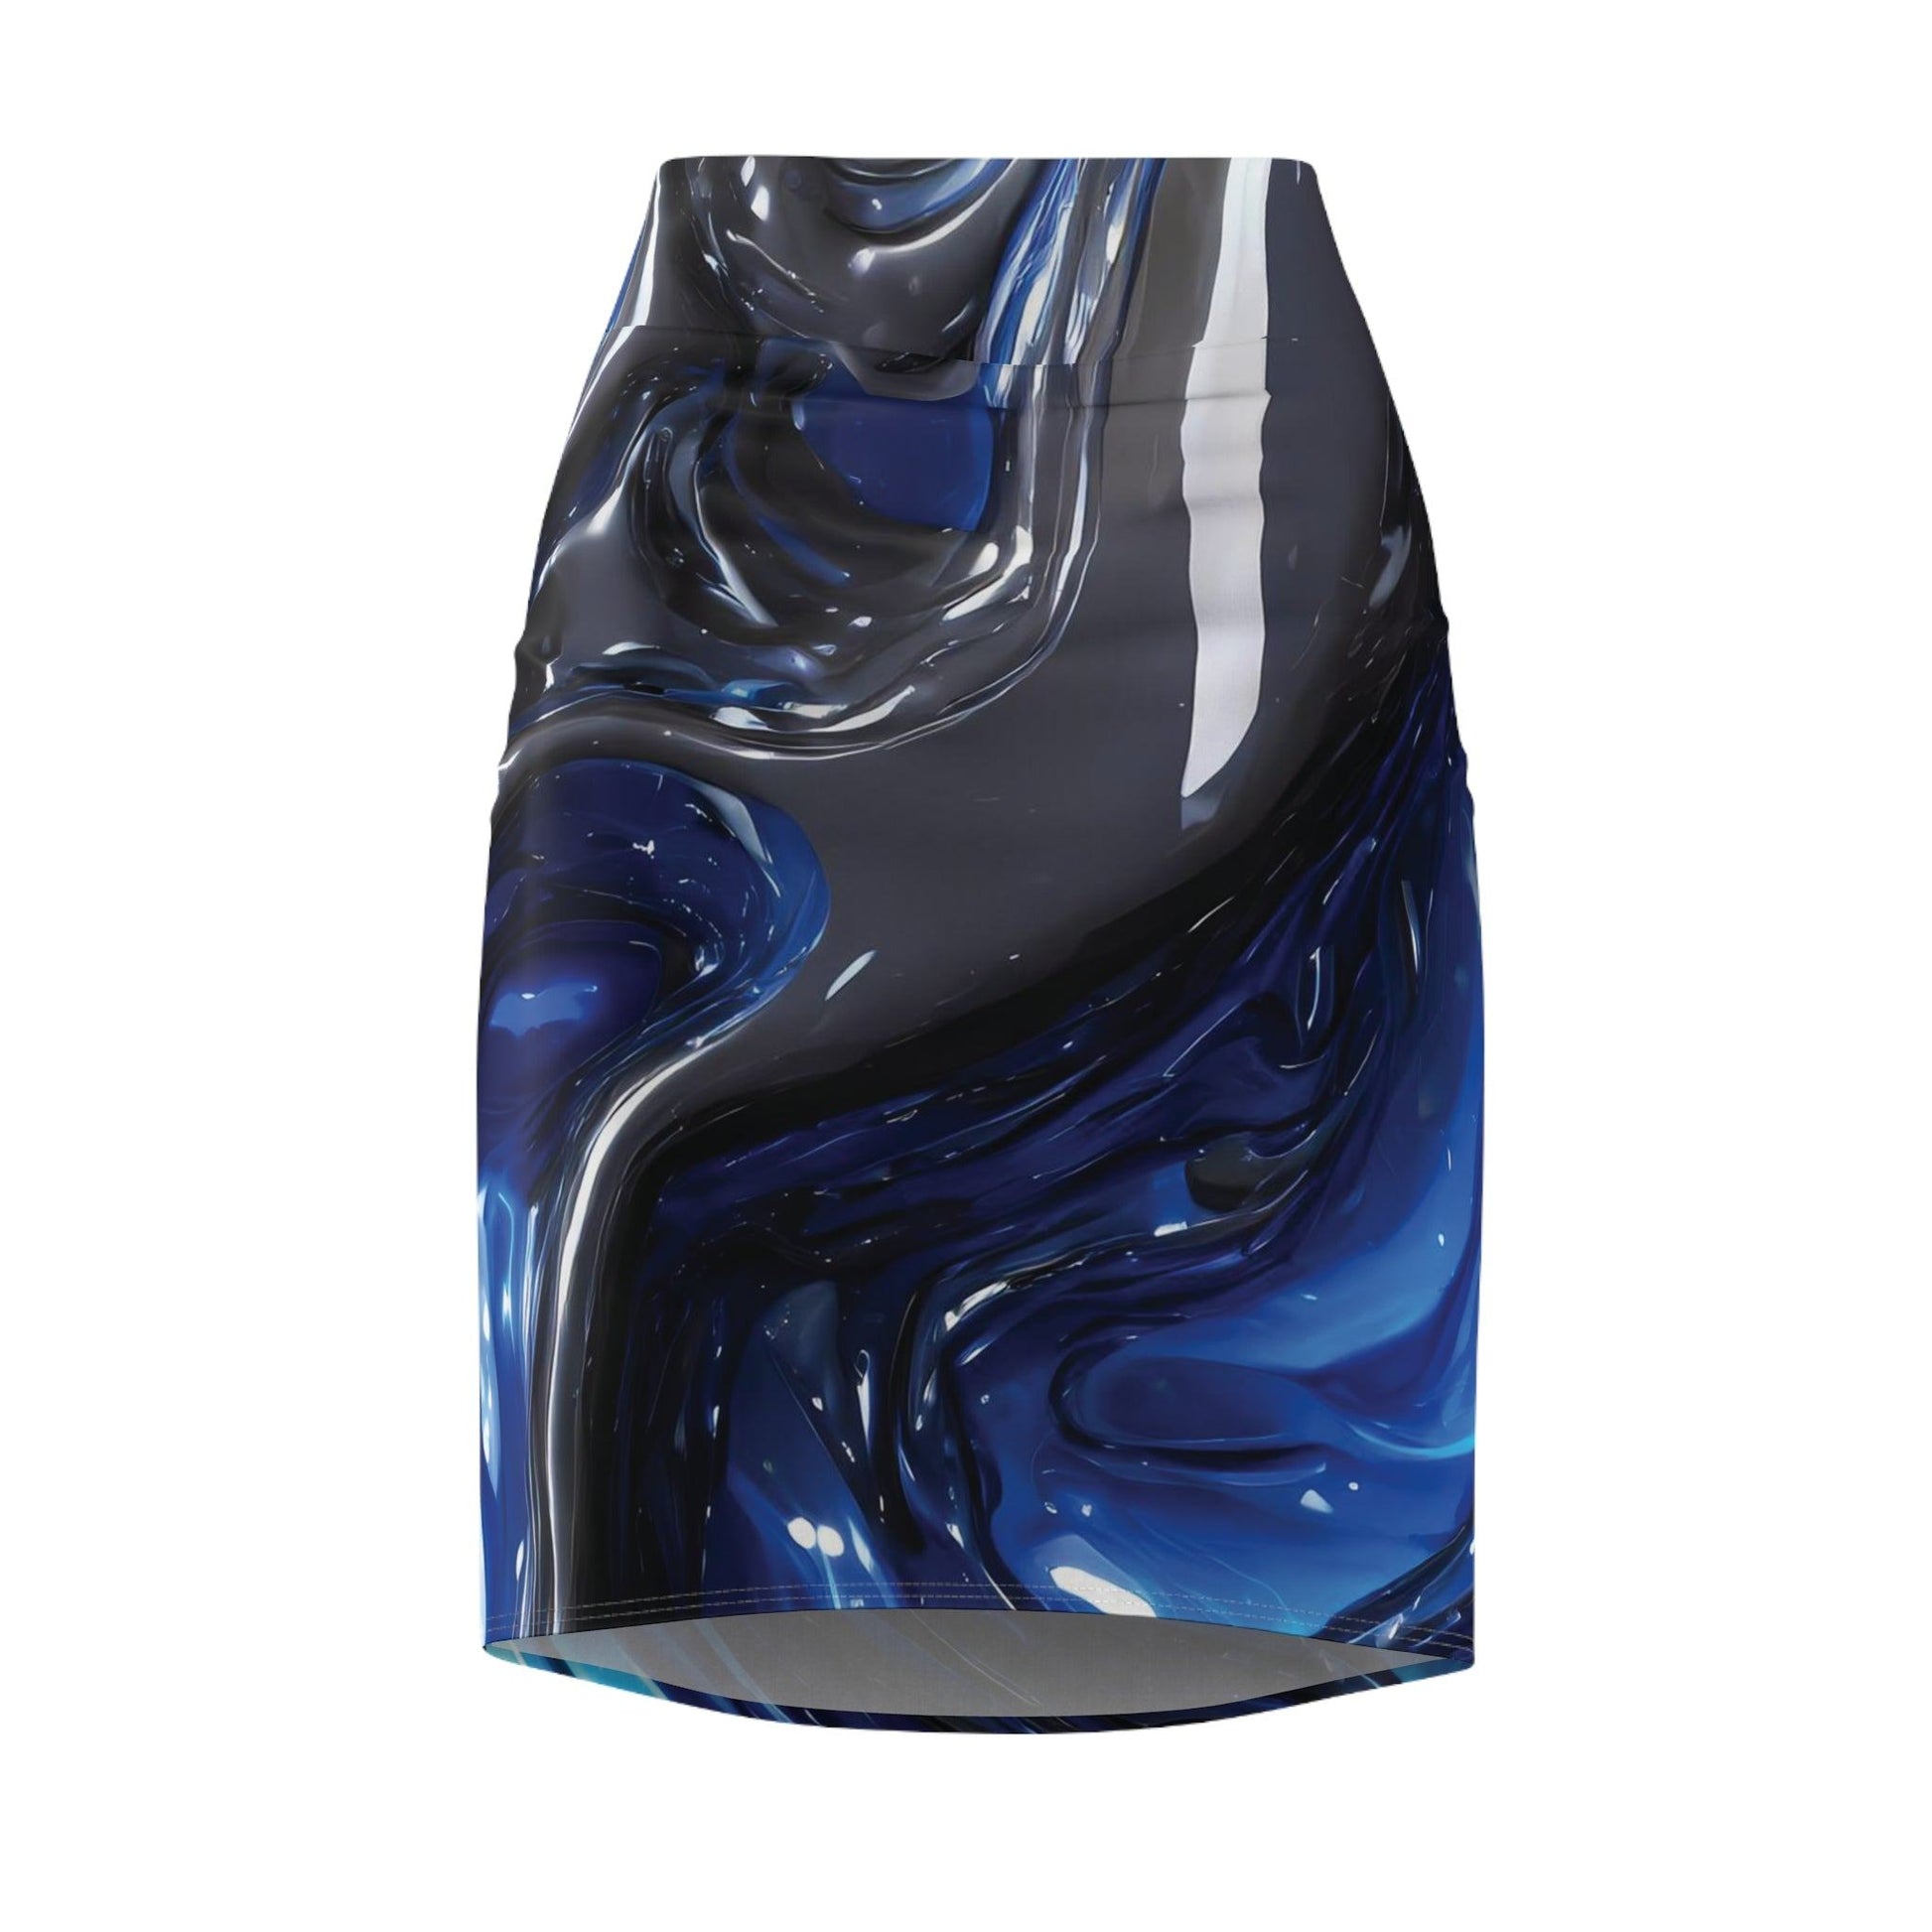 Liquid Blue Bleistiftrock Bleistiftrock 74.99 All Over Print, AOP, AOP Clothing, Assembled in the USA, Assembled in USA, Bleistiftrock, Made in the USA, Made in USA, Skirts & Dresses, Sublimation, Women's Clothing JLR Design